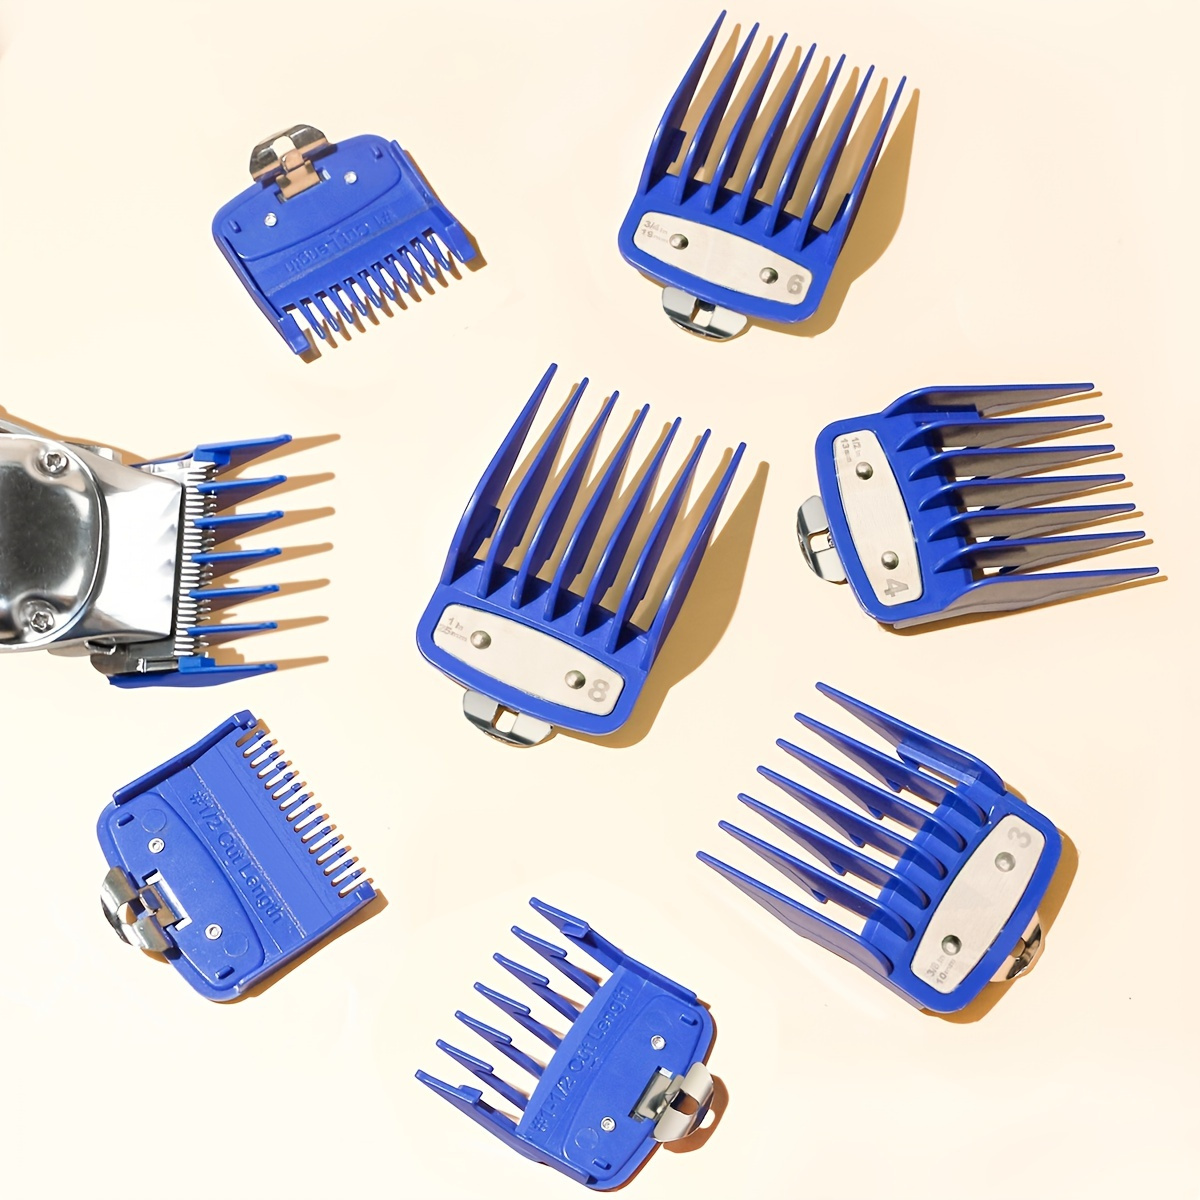 

8pcs Professional Universal Hair Clipper Guards Hair Clipper Limit Comb Barber Clipper Guard Combs Attachment Replacement Push Shear Tool Universal Size 4.5*3.8mm